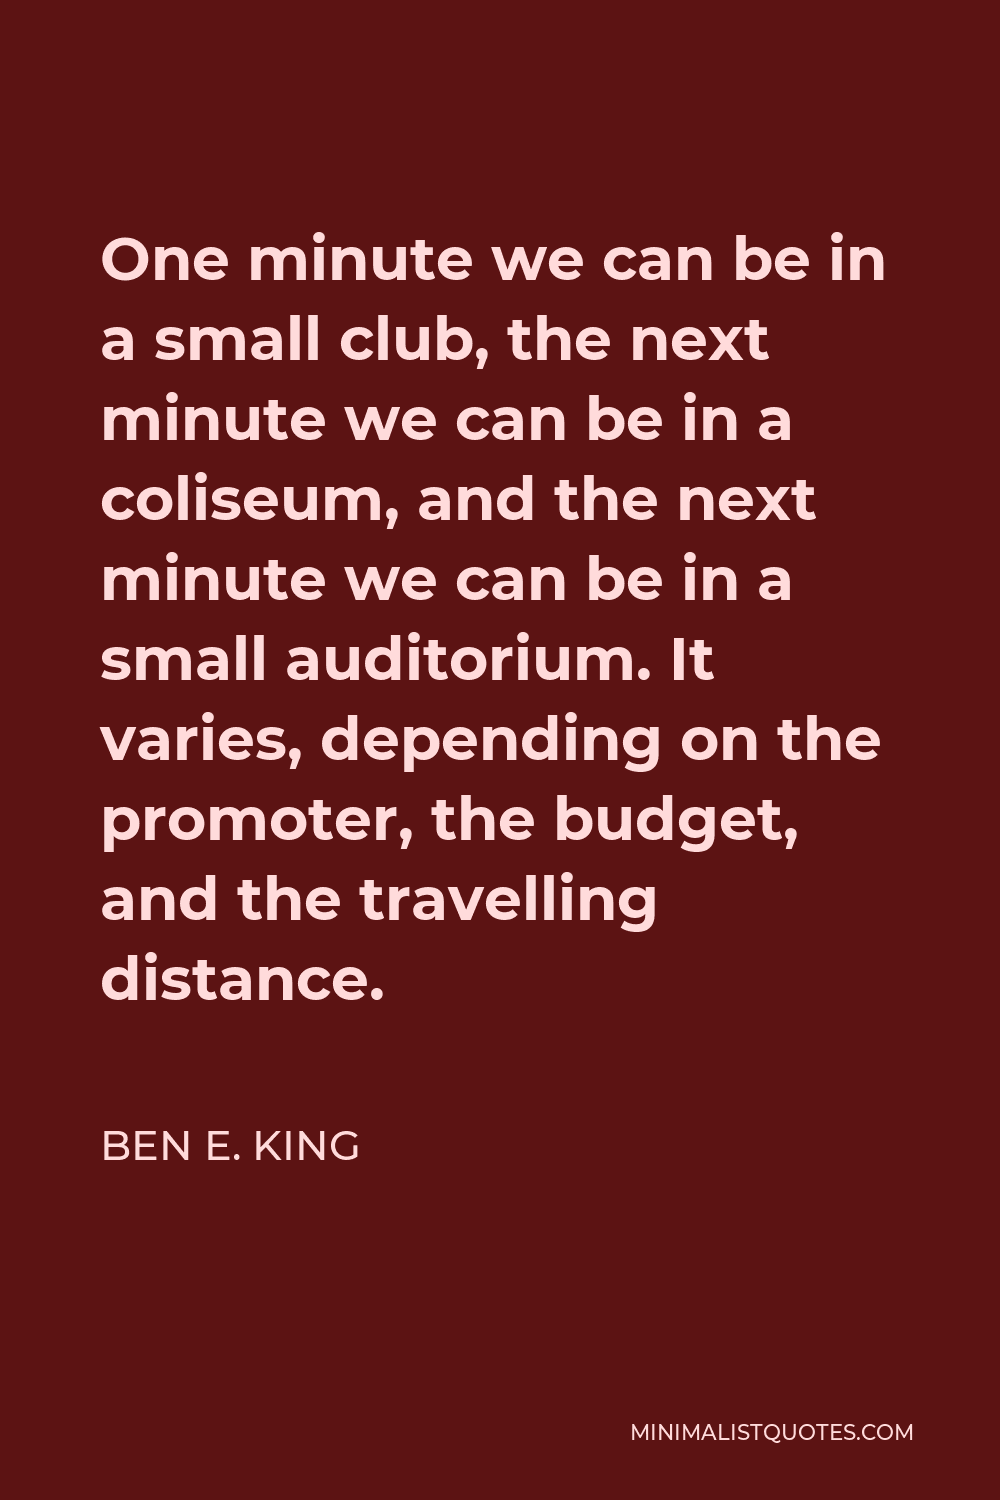 Ben E. King Quote - One minute we can be in a small club, the next minute we can be in a coliseum, and the next minute we can be in a small auditorium. It varies, depending on the promoter, the budget, and the travelling distance.